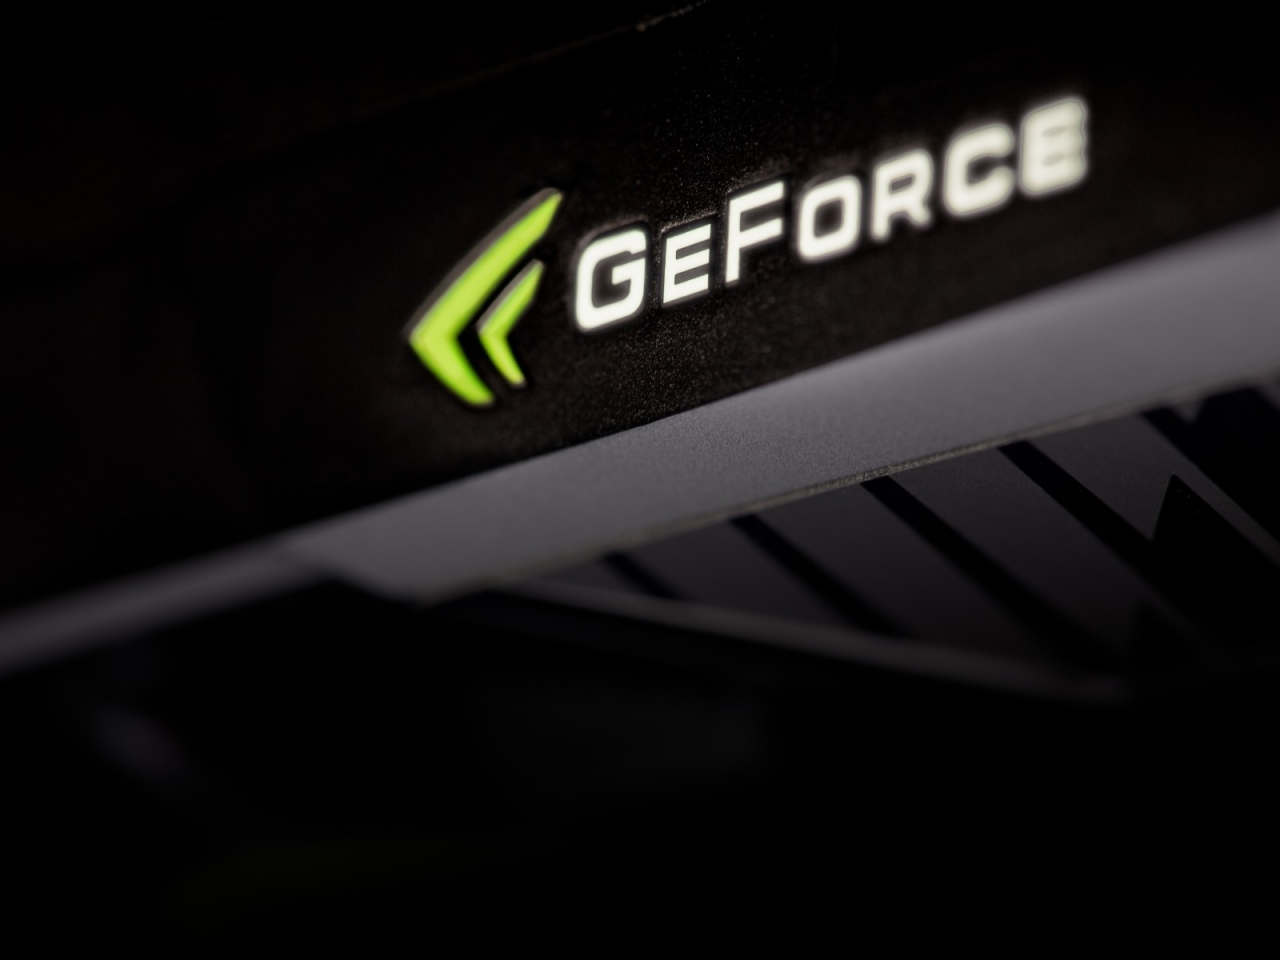 GeForce Graphics for 1280 x 960 resolution